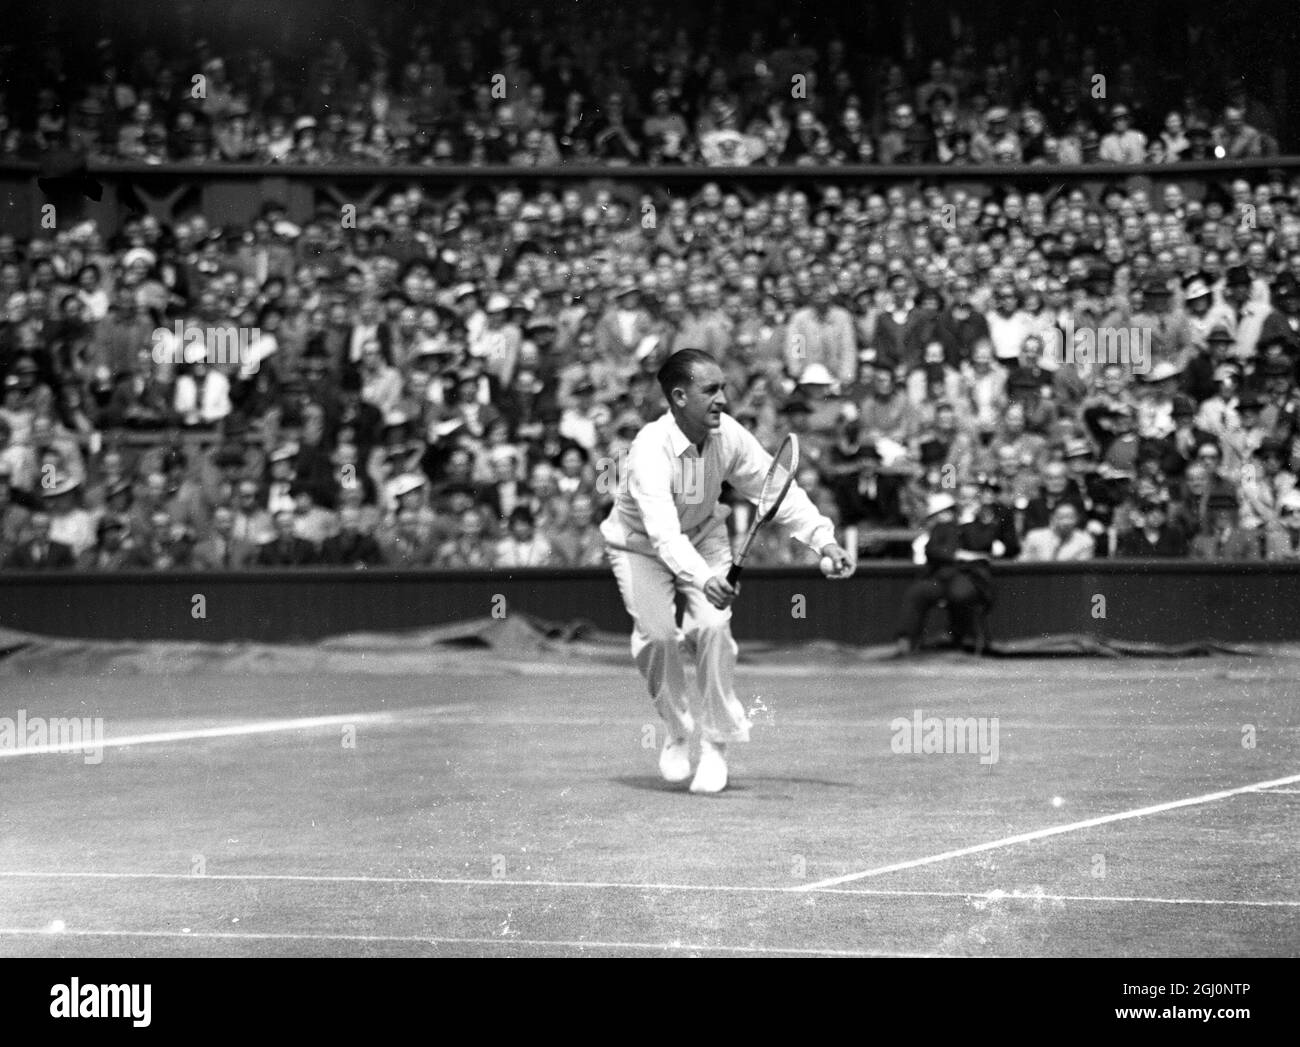 Great Britain , winner of the Cup for three years , met Australia , who have never succeeded in gaining the trophy , in the Challenge Bound of the Davis Cup competition . Bunny Austin of Great Britain met Jack Crawford in the first singles match on the Centre Court . Seen here Crawford in action against Austin 25 July 1936 Stock Photo